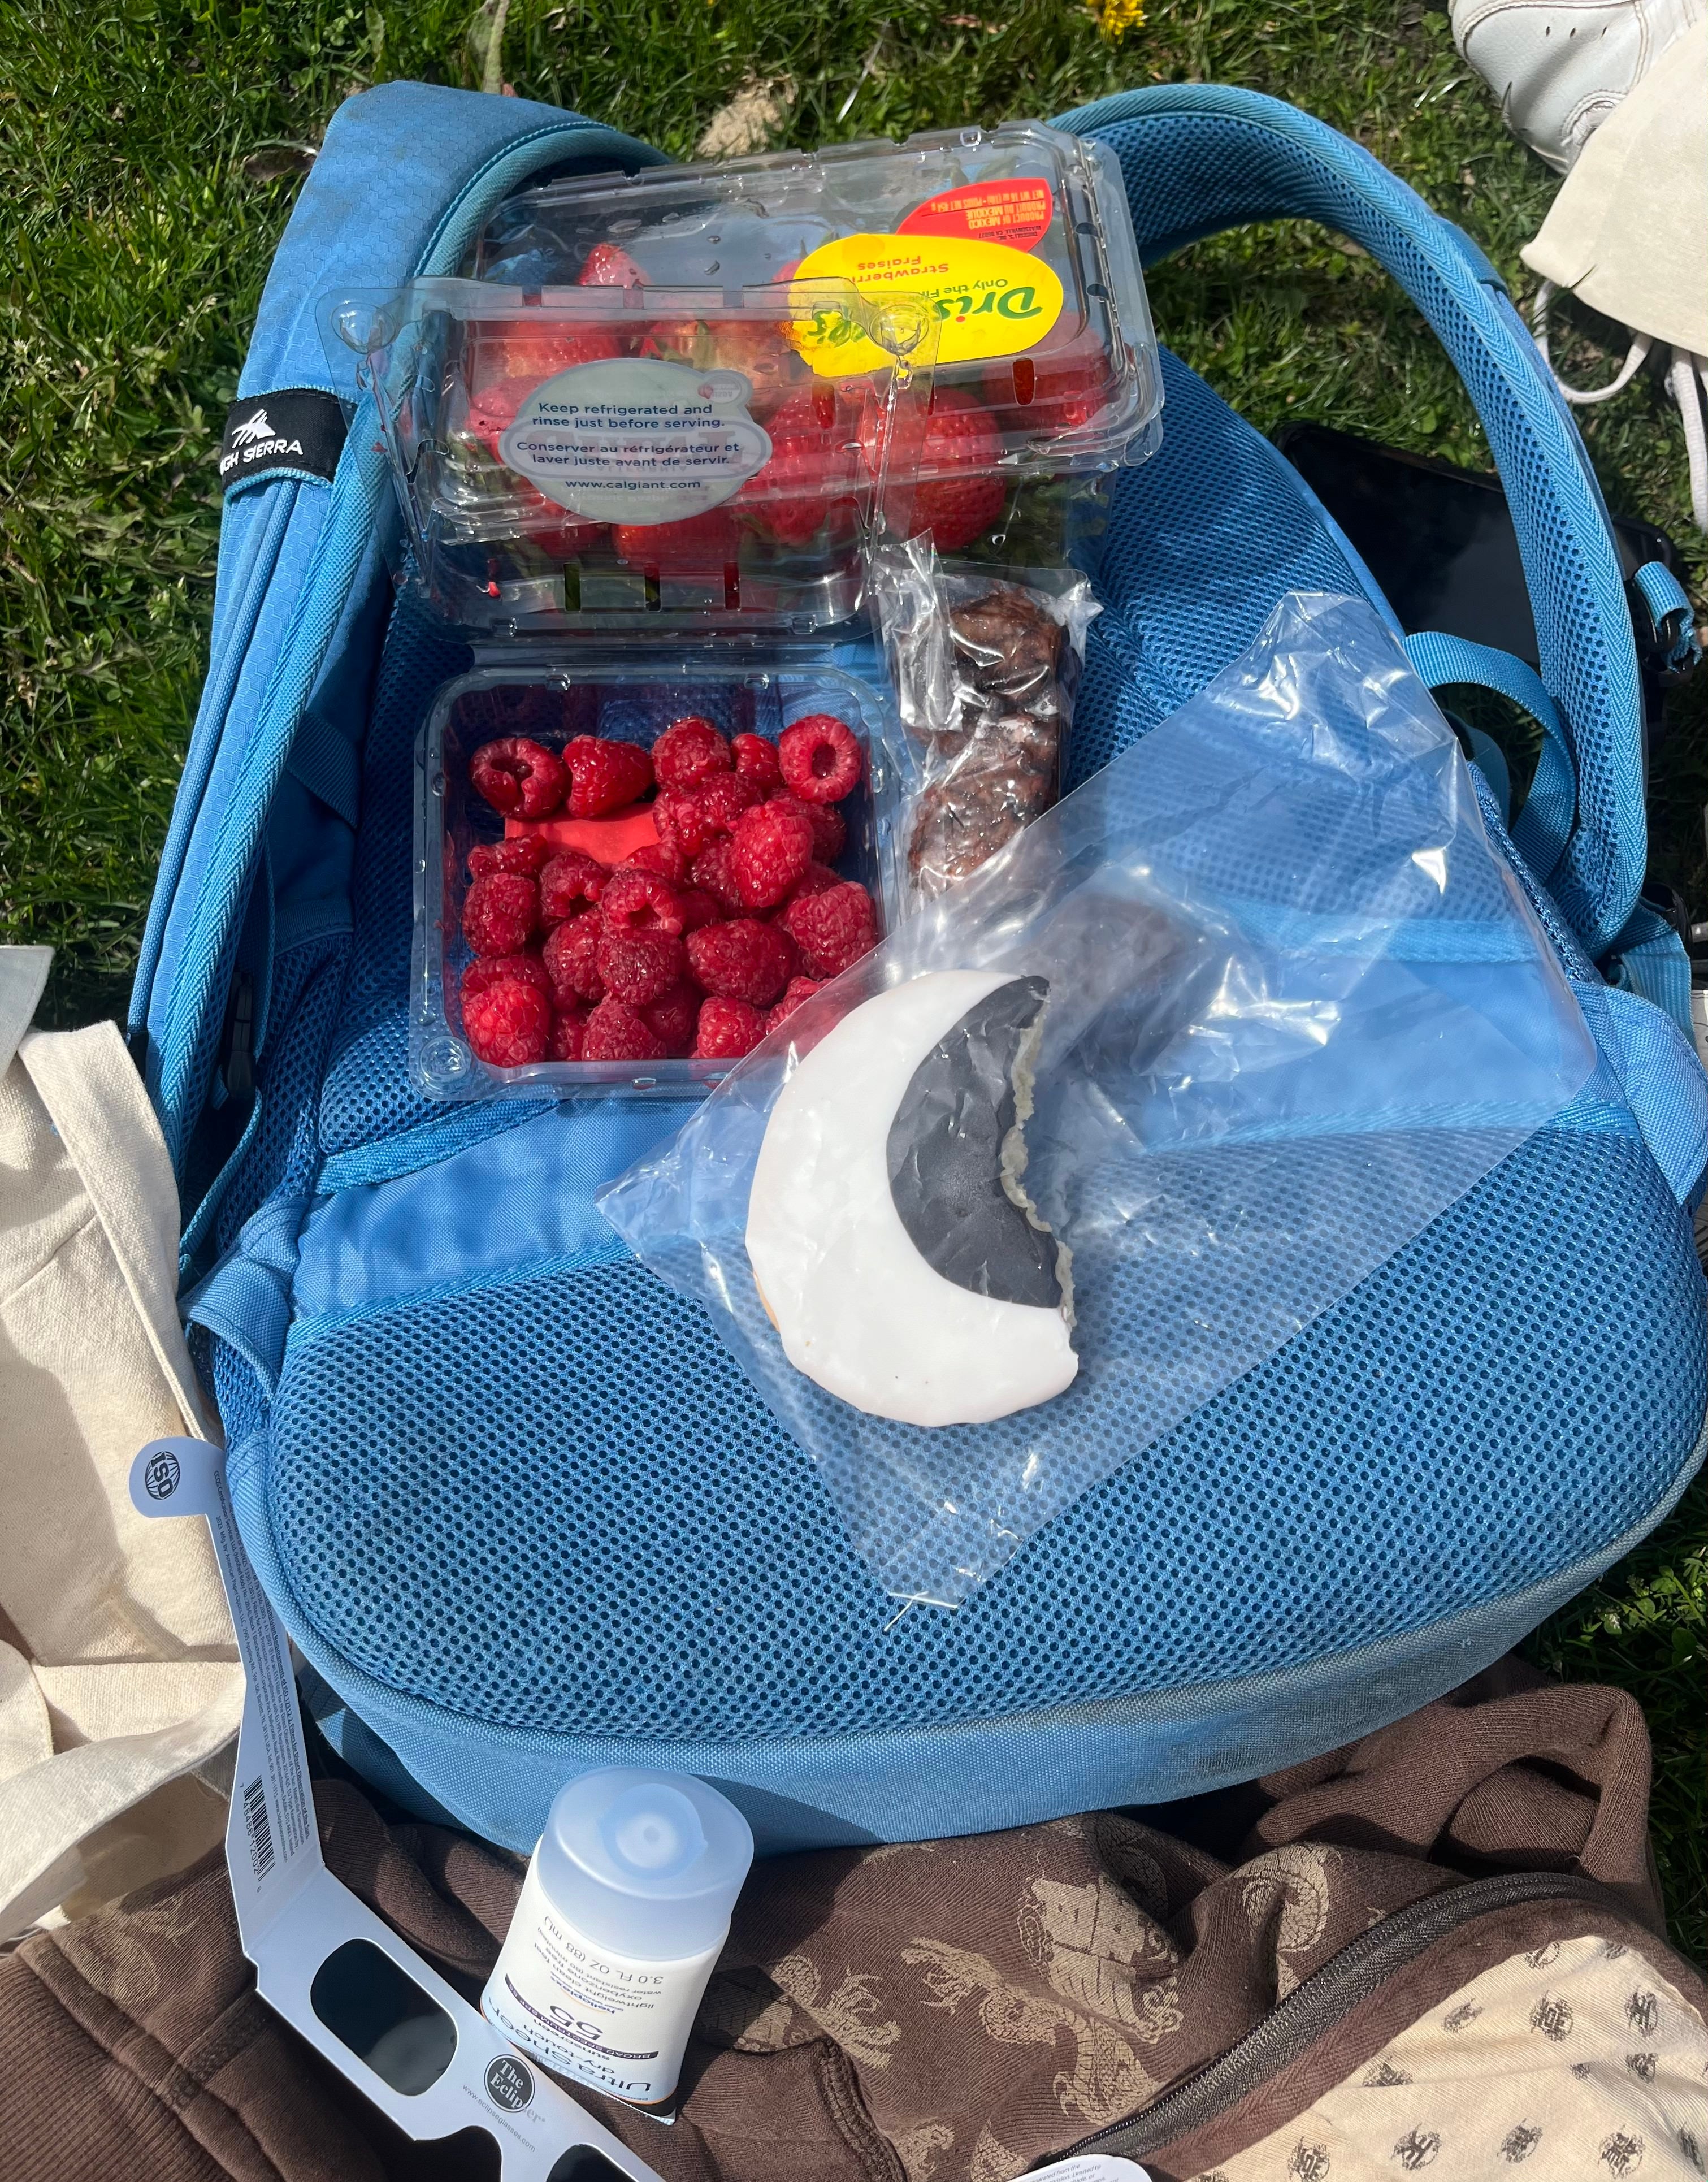 A container of strawberries and raspberries and an "eclipse" themed cookie on top of a blue backpack in the grass at Wilder Bowl.